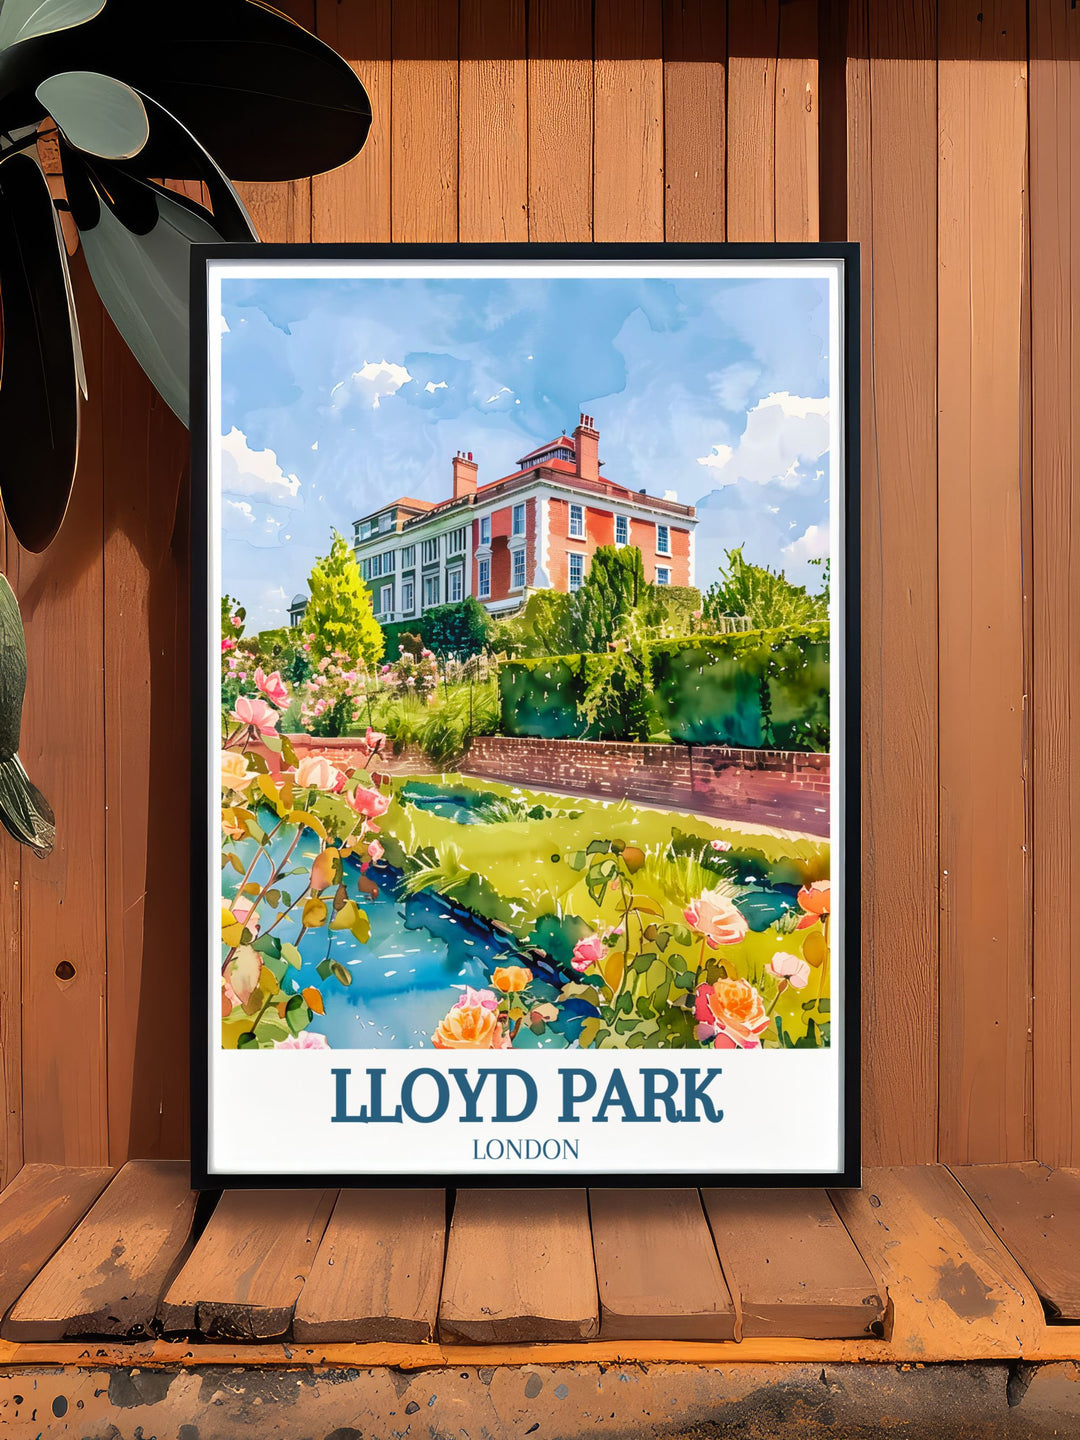 London travel poster depicting the tranquil rose garden at William Morris gallery in Lloyd Park. This framed print adds elegance to any room. Perfect for art enthusiasts and London lovers.